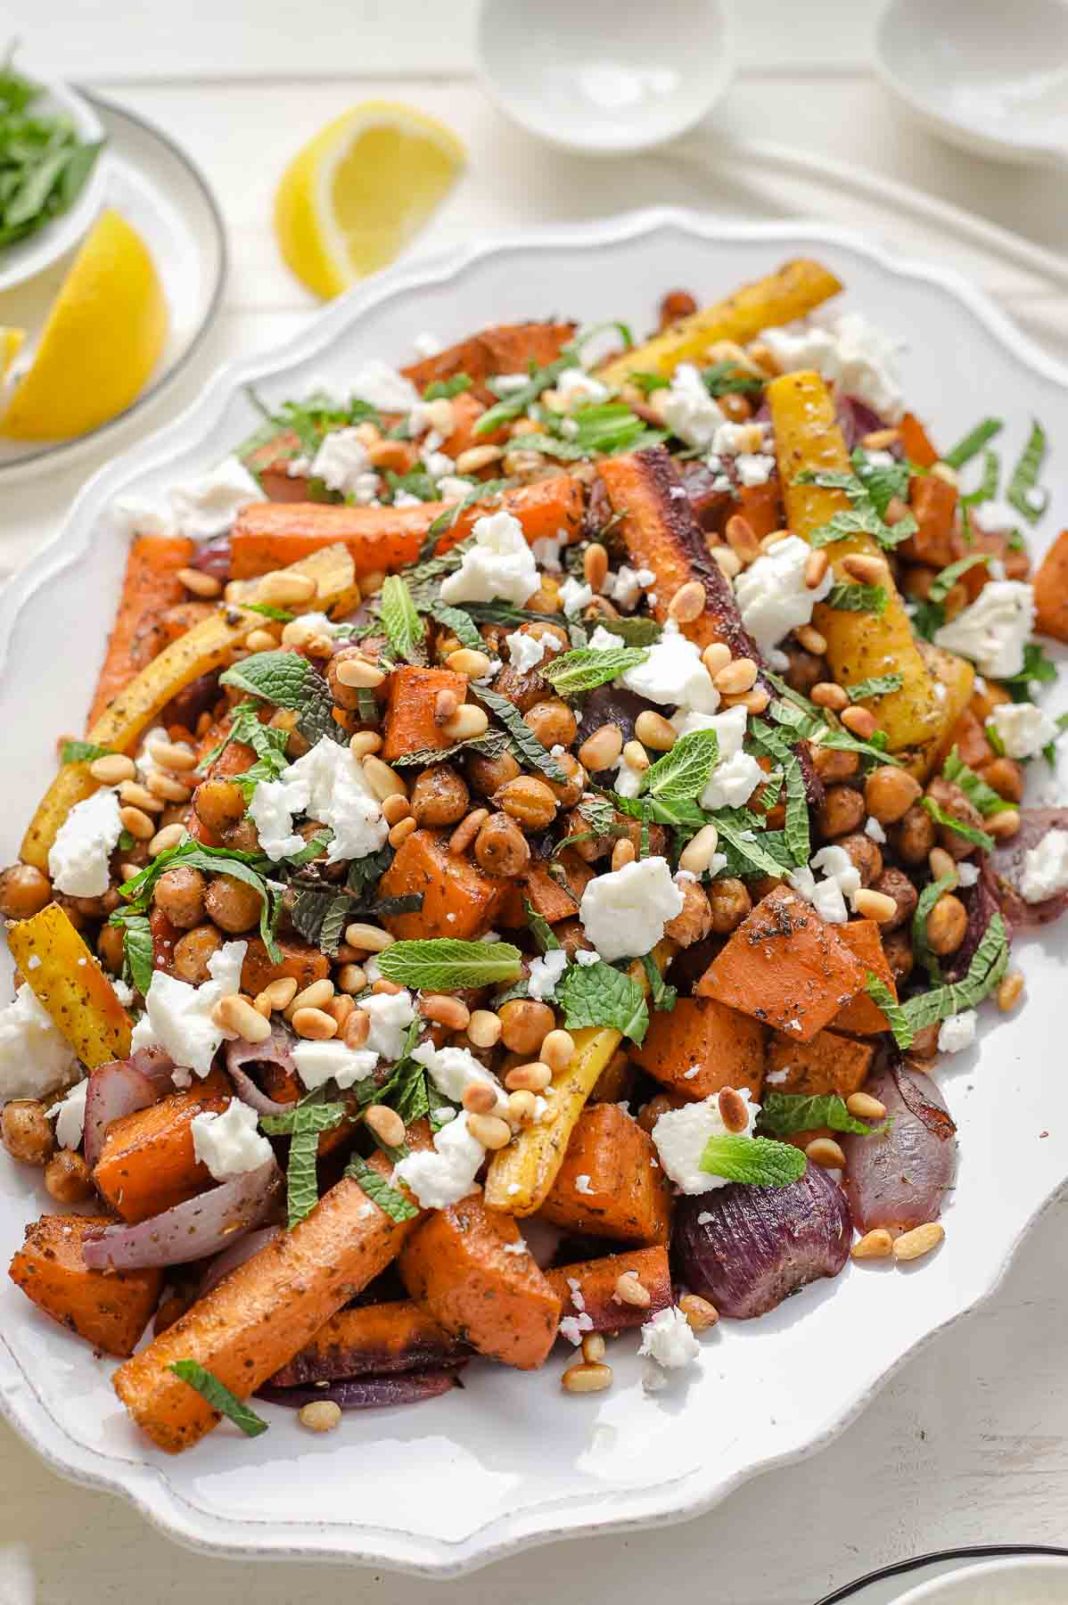 Roasted Vegetable and Chickpeas with Za’atar, Mint and Feta | Recipe